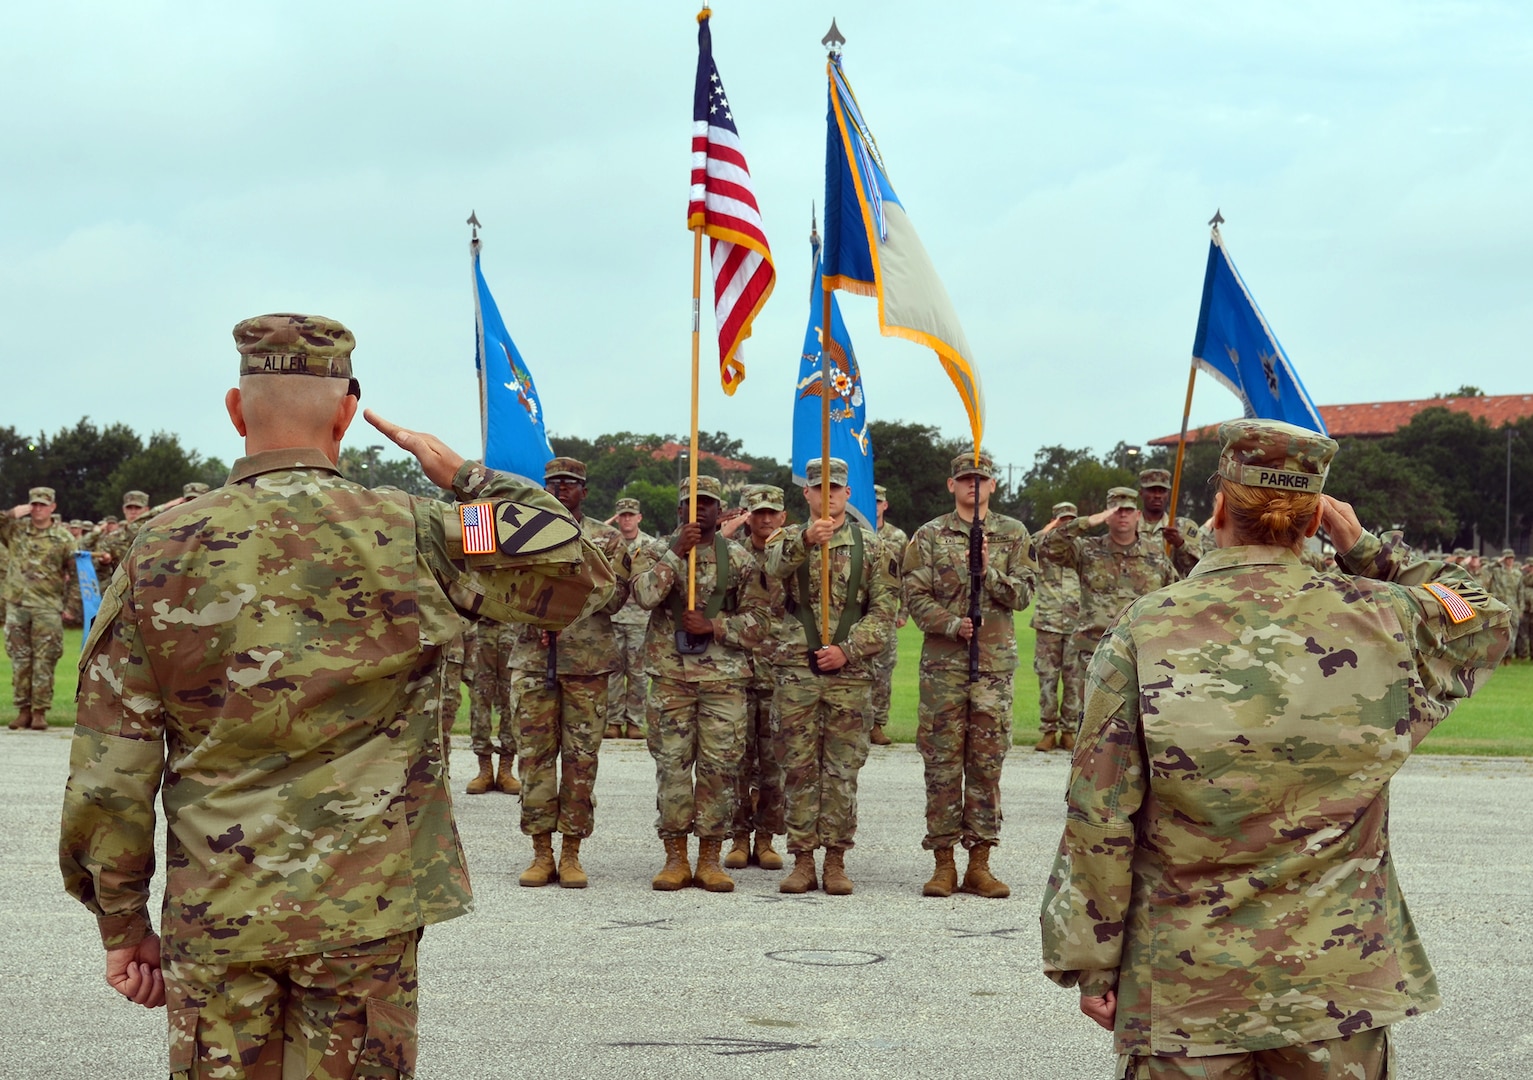 Col. Daniel Allen (left), 470th Military Intelligence Brigade incoming commander, and Col. Ingrid Parker (right), 470th MI Brigade outgoing commander, salute the colors during the brigade’s change of command ceremony at the MacArthur Parade Field at Joint Base San Antonio-Fort Sam Houston July 9.